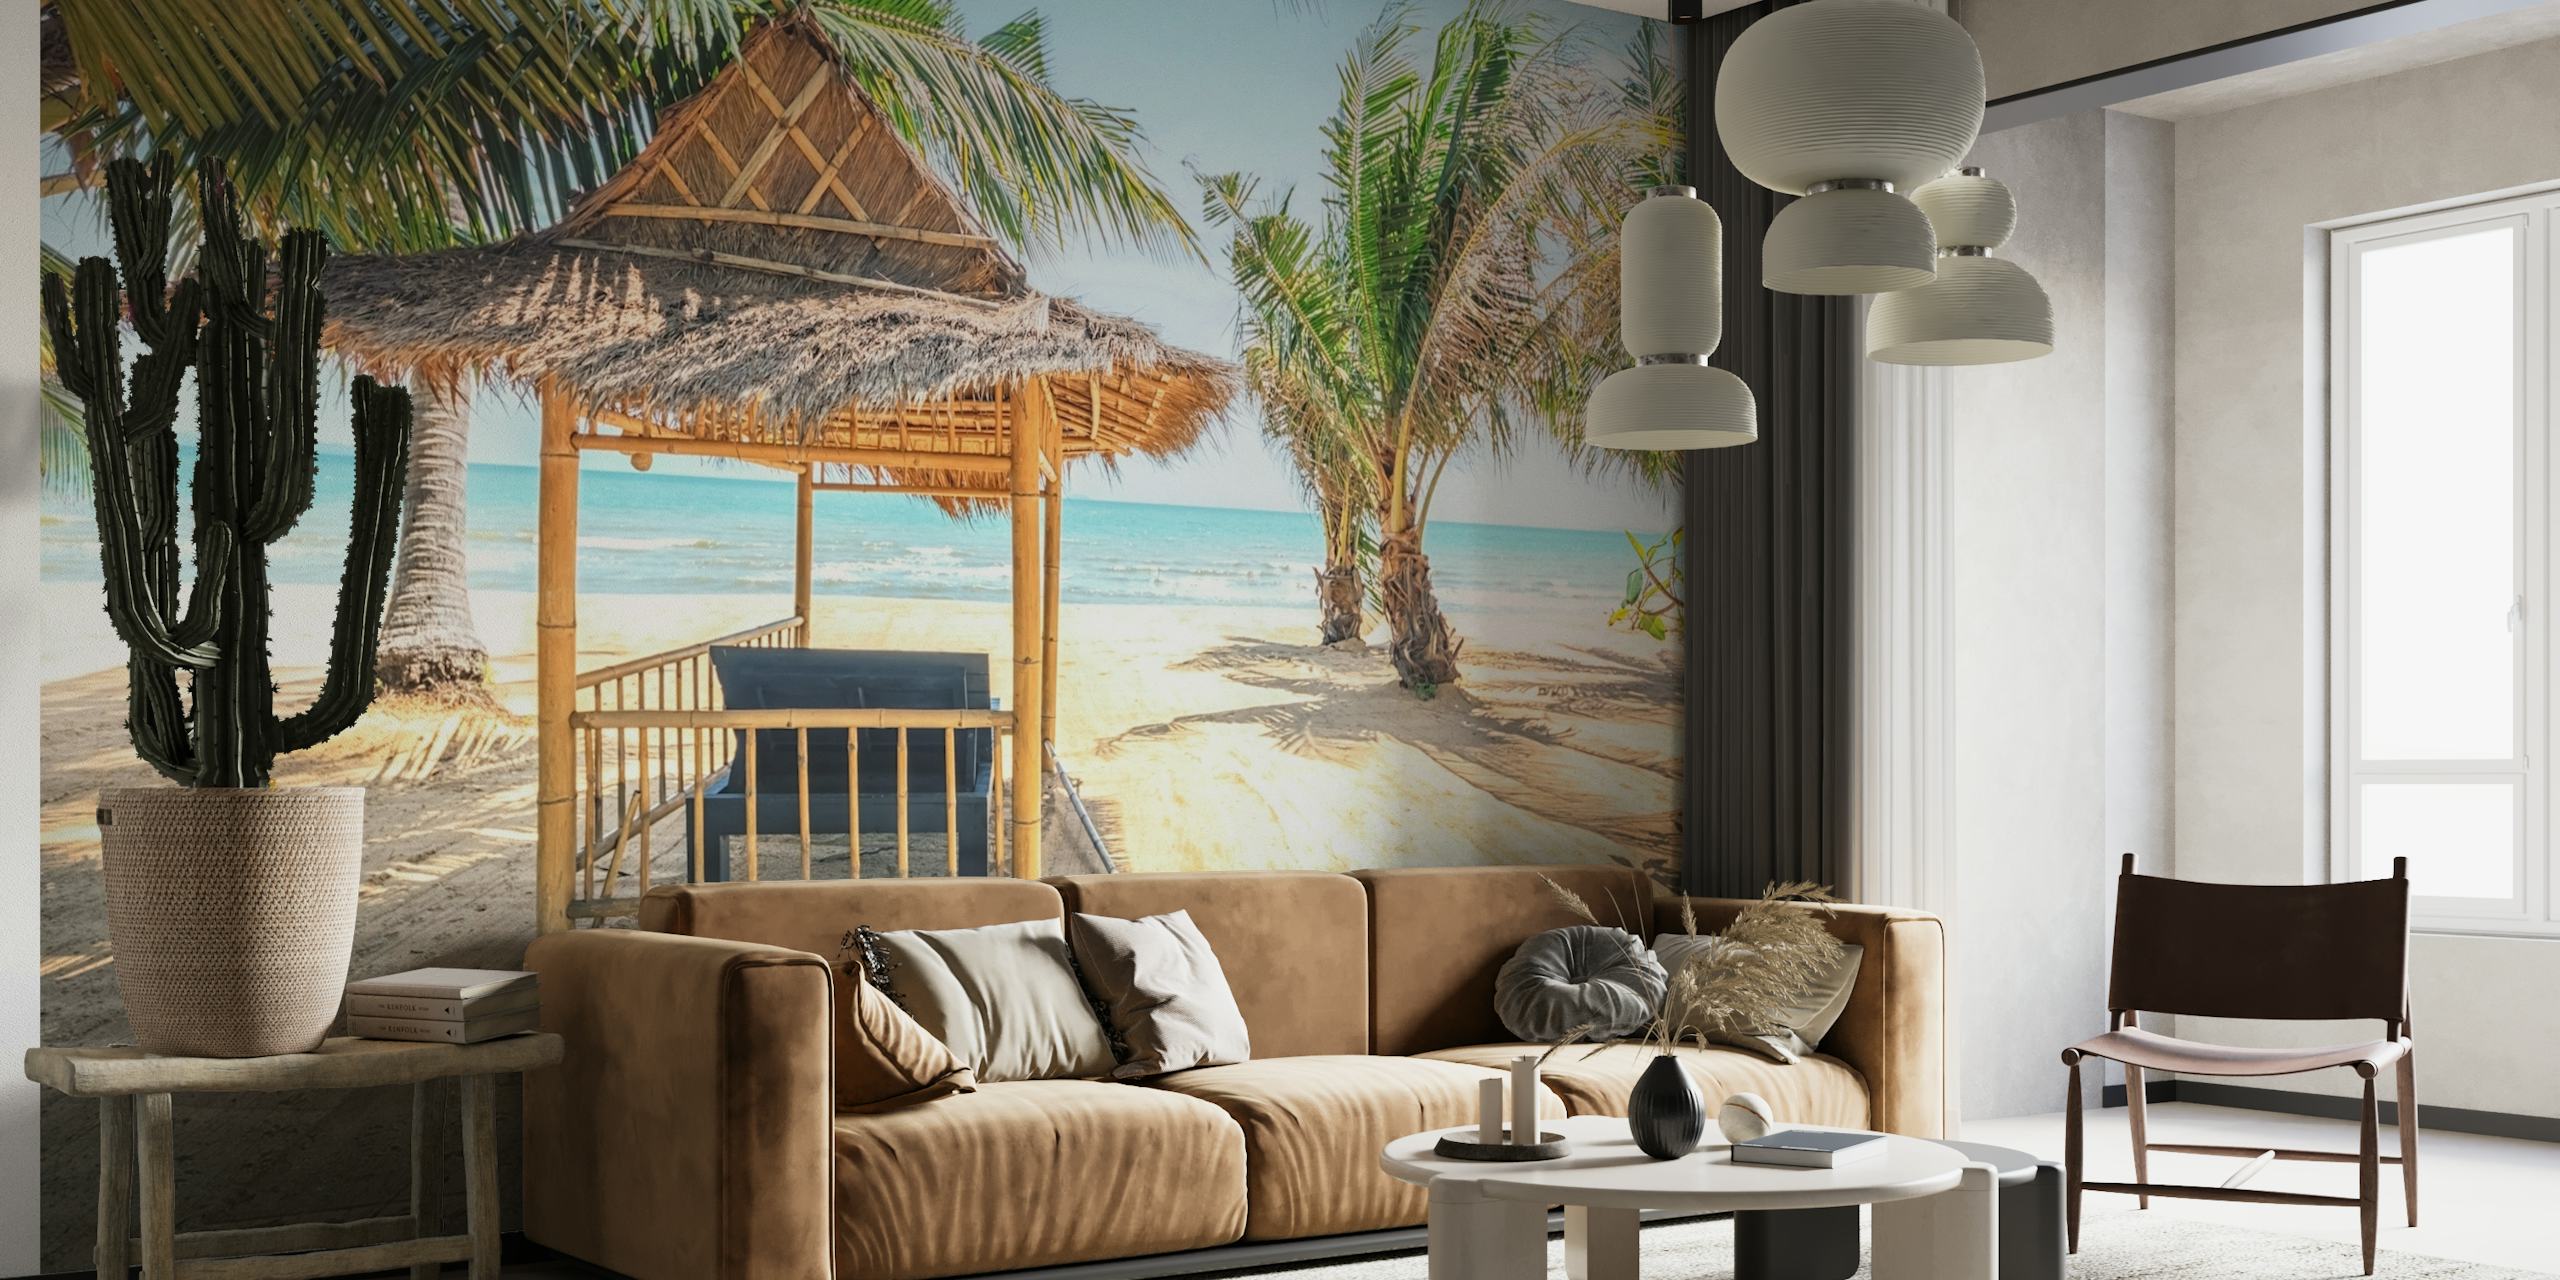 Thatched hut on a sandy beach with palm trees and ocean view wall mural